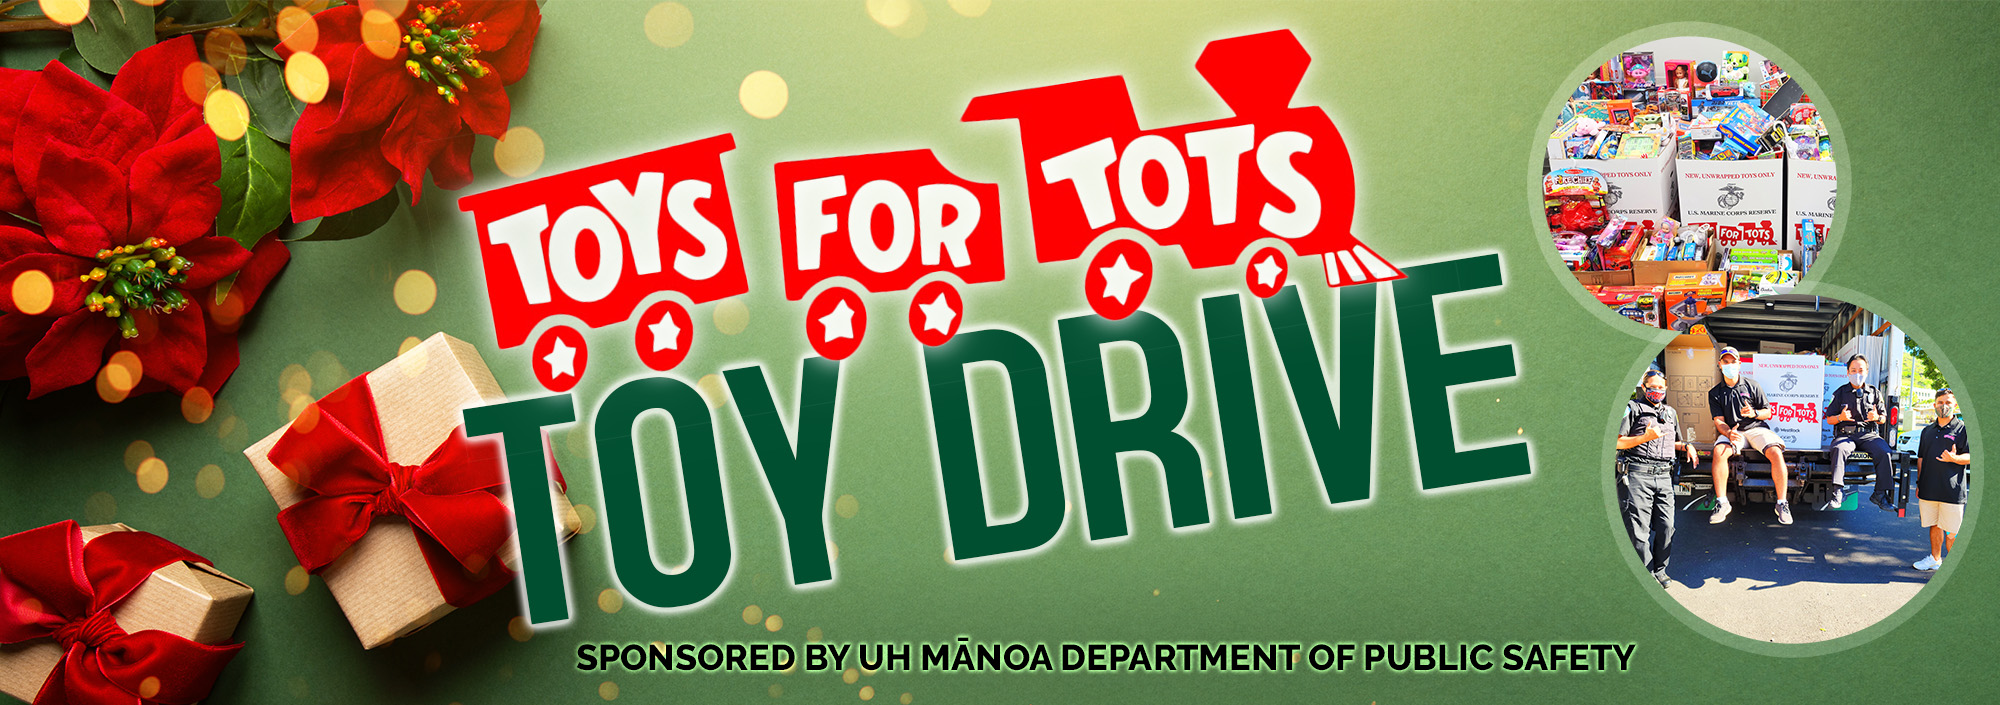 toys for tots flyers